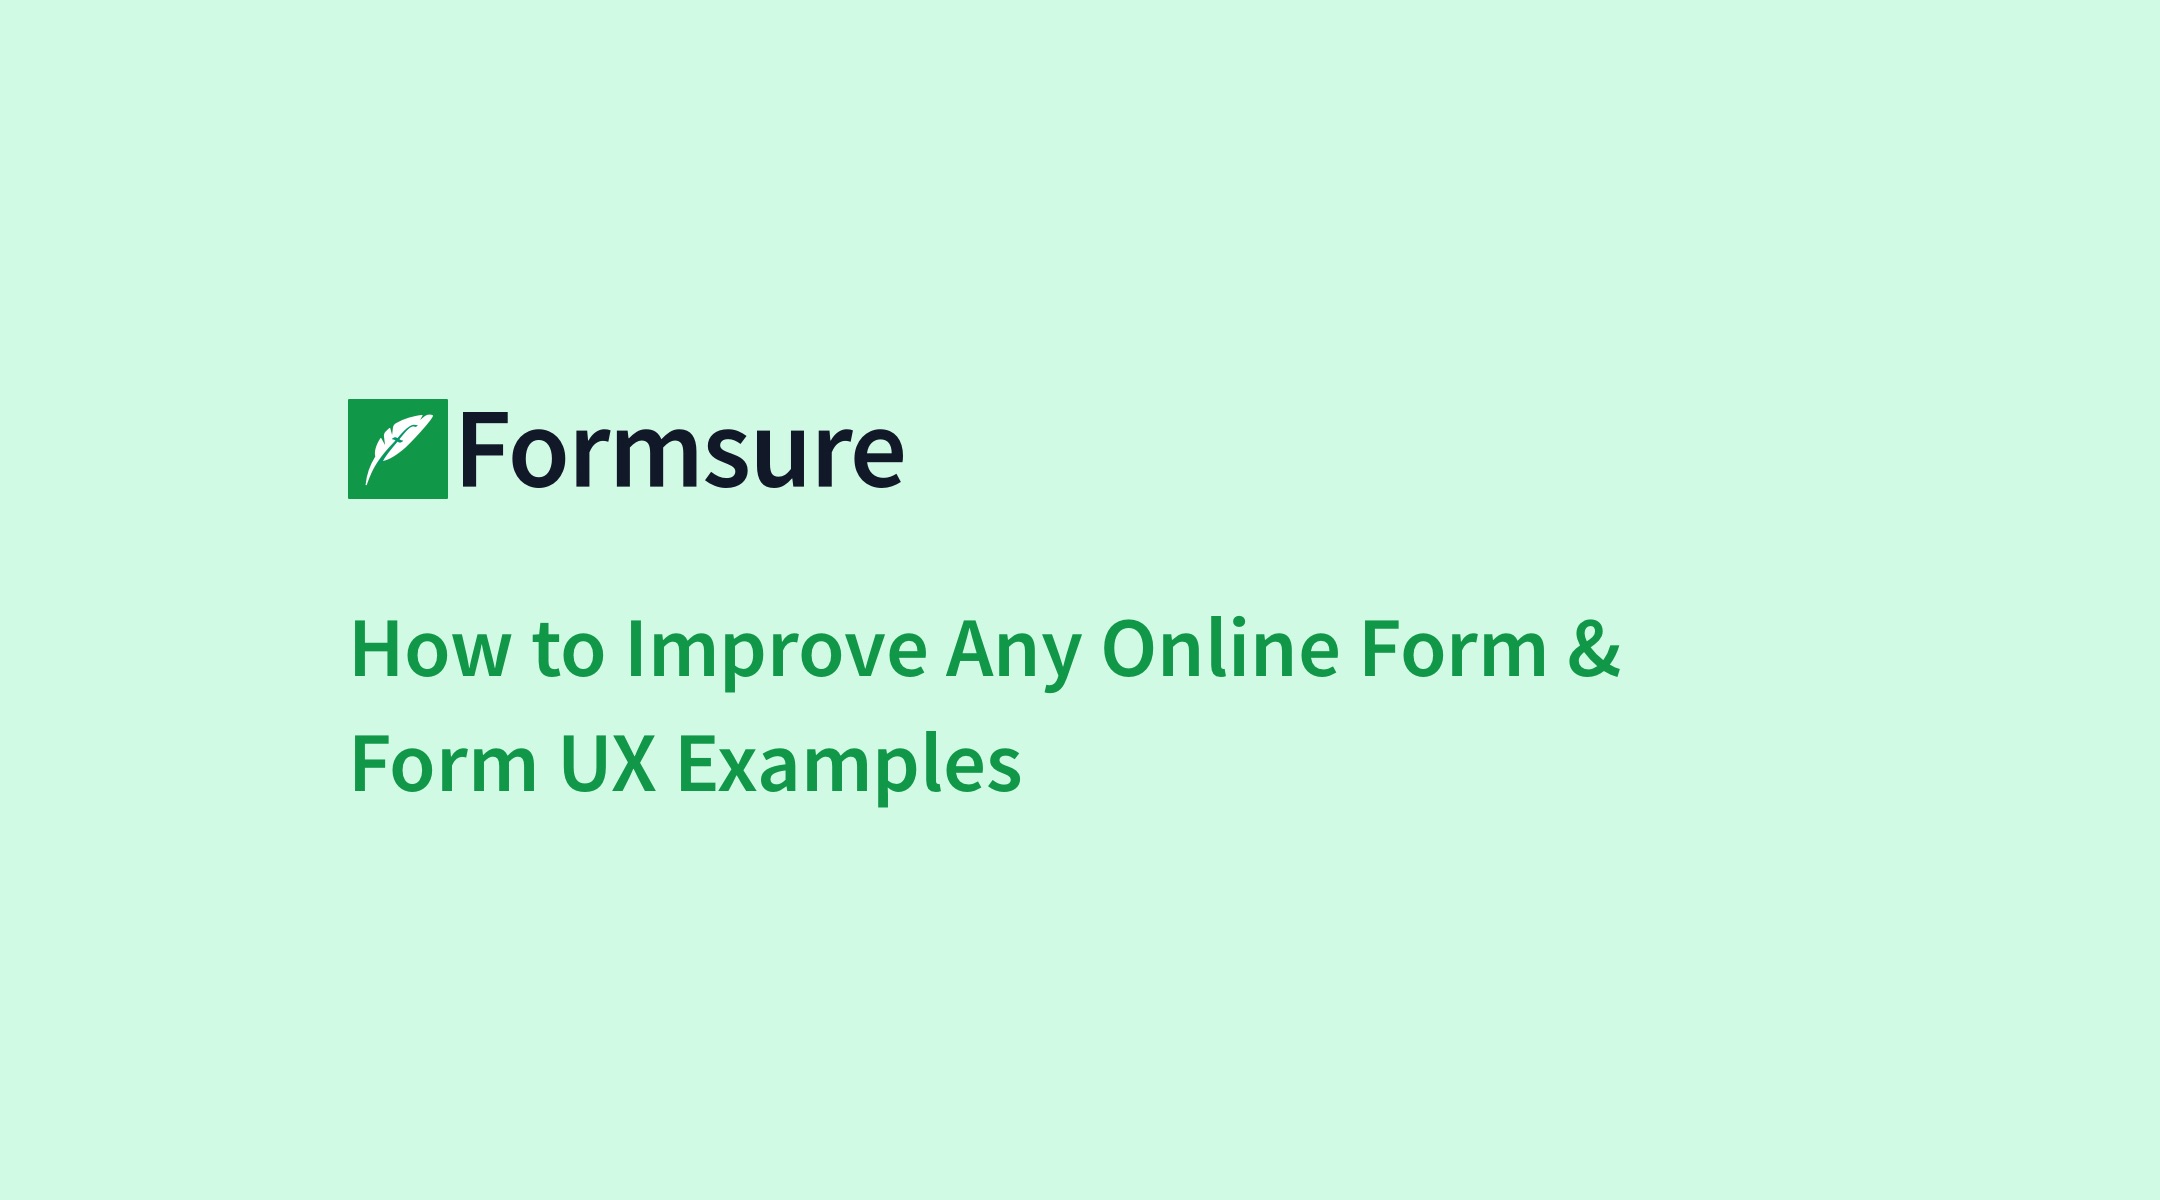 How to Improve Any Online Form & Form UX Examples - Formsure